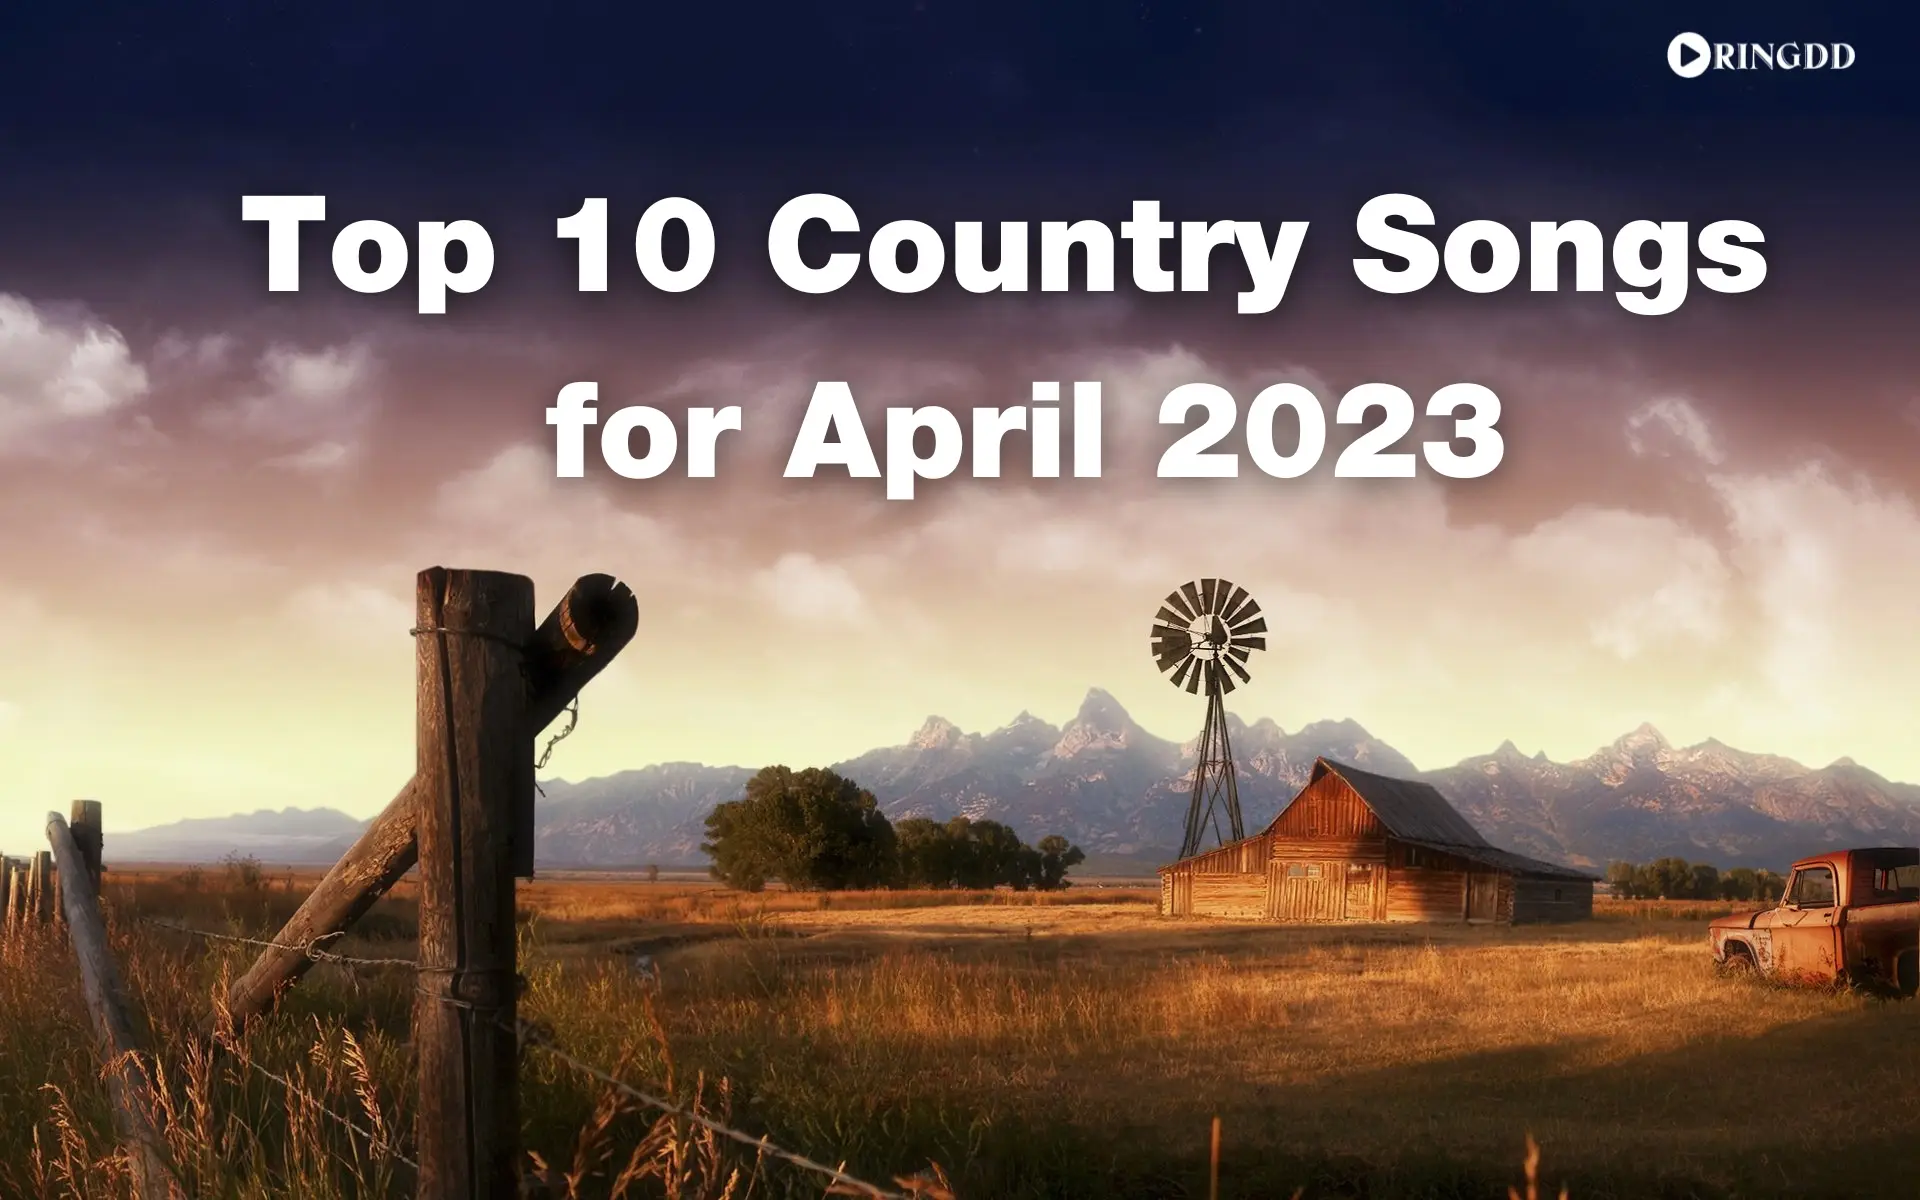 Top 10 Country Songs for April 2023